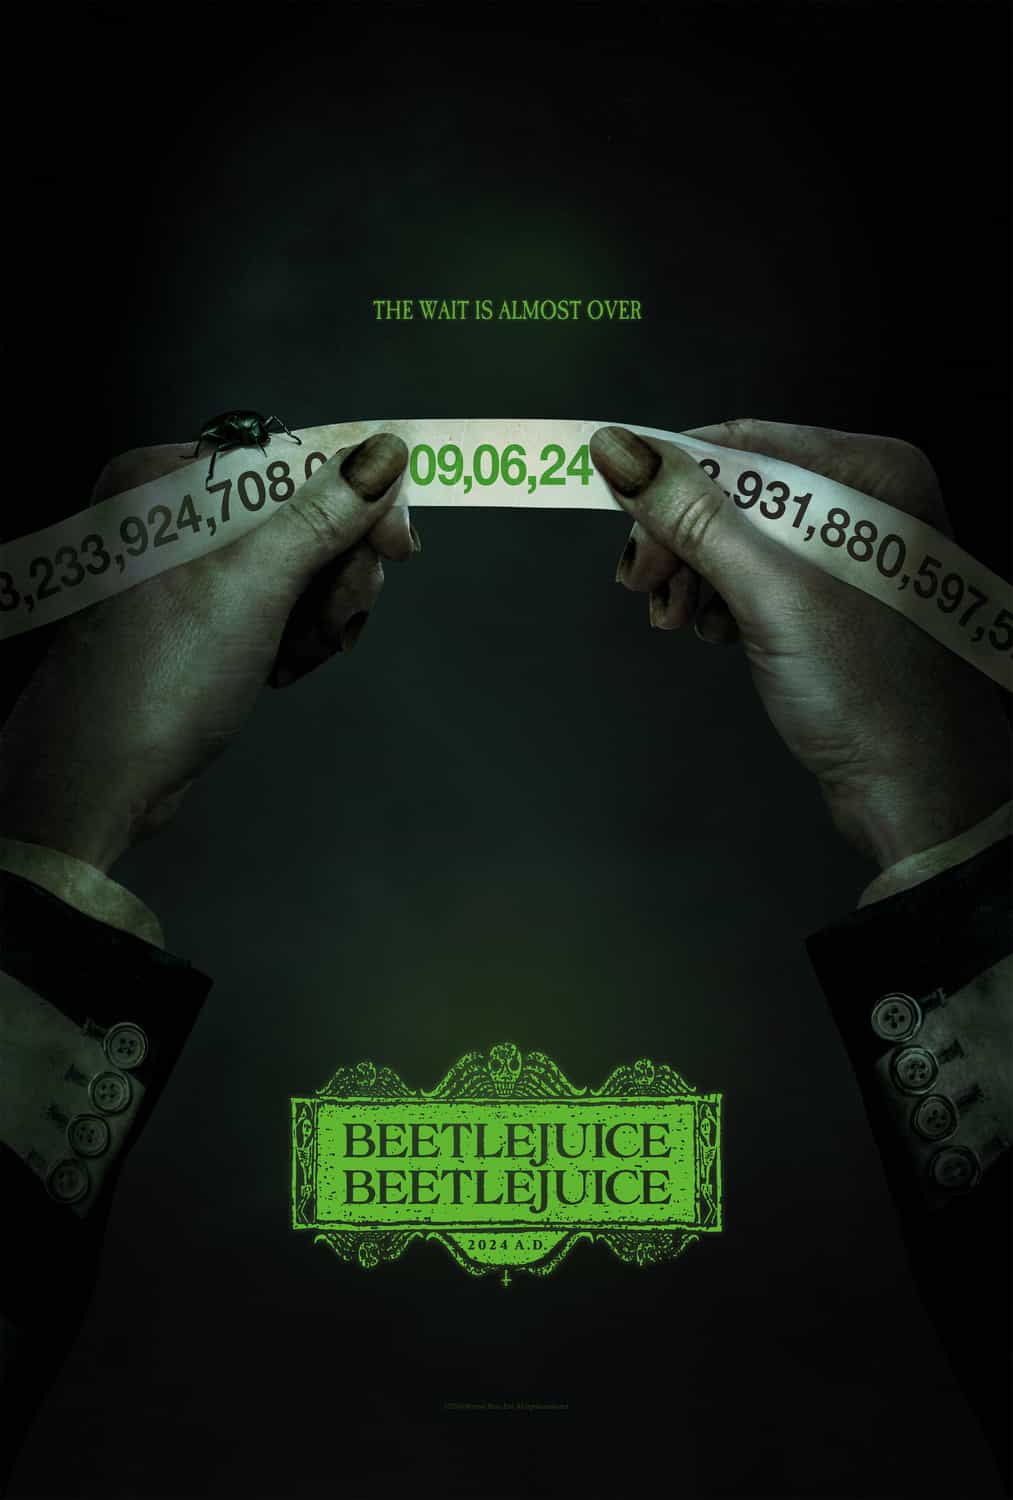 New poster has been released for Beetlejuice 2 which stars Michael Keaton and Jenna Ortega - movie UK release date 6th September 2024 #beetlejuice2